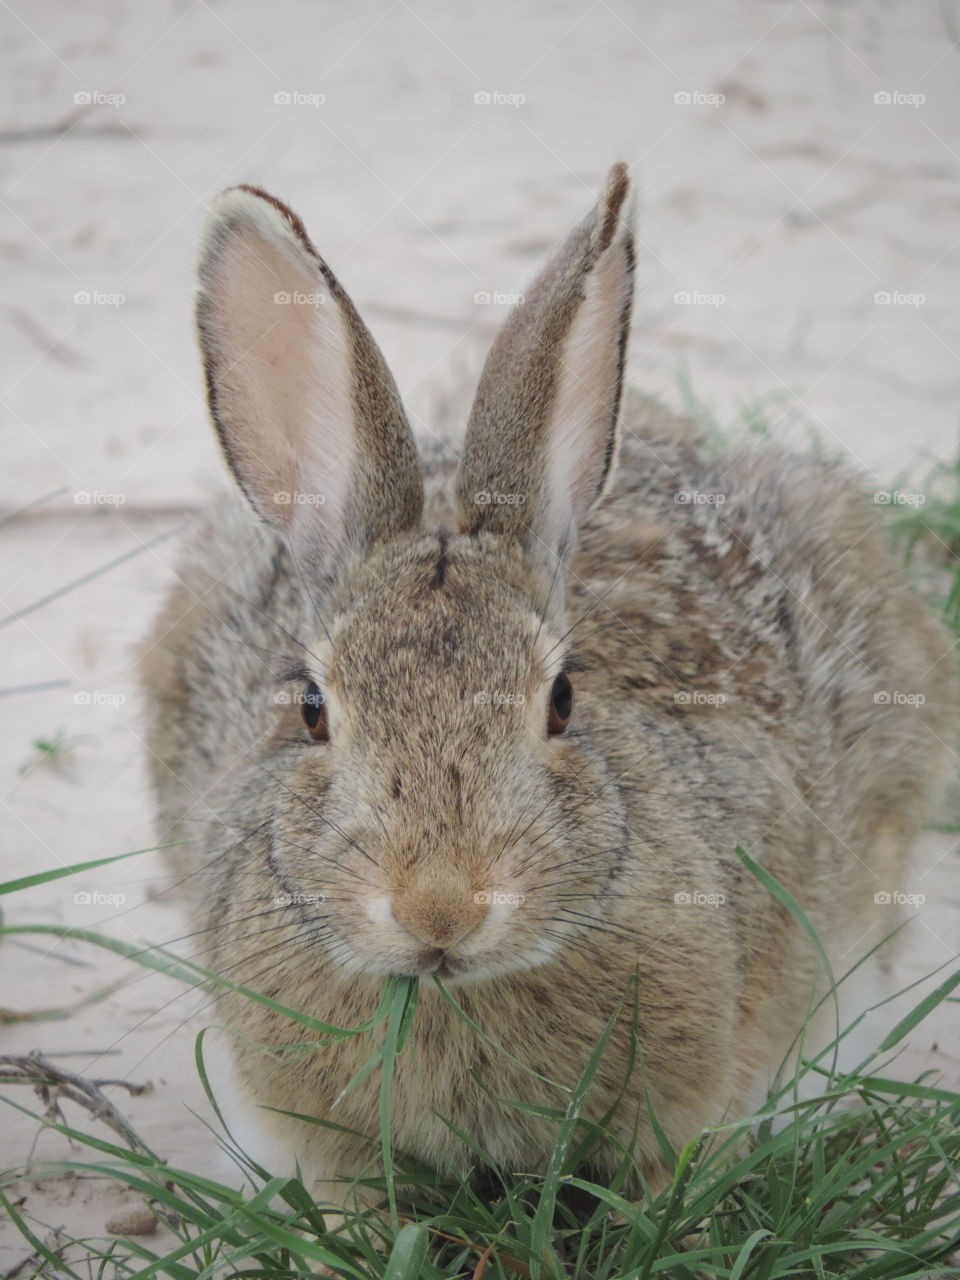 Sand Hare. This brave bunny lives in the Badlands